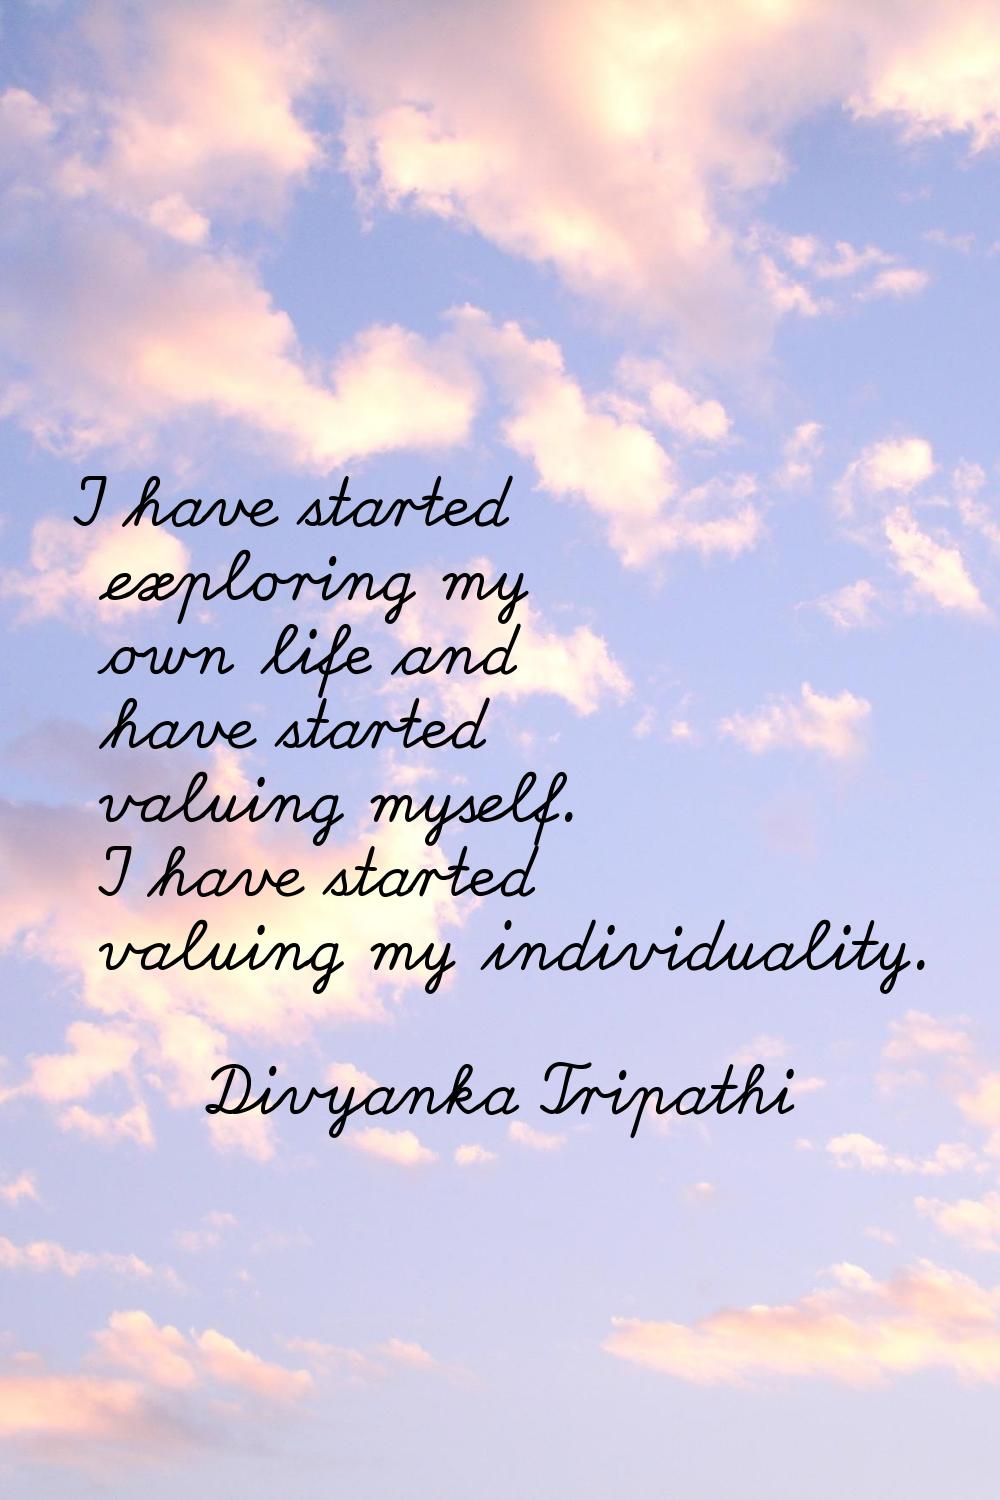 I have started exploring my own life and have started valuing myself. I have started valuing my ind